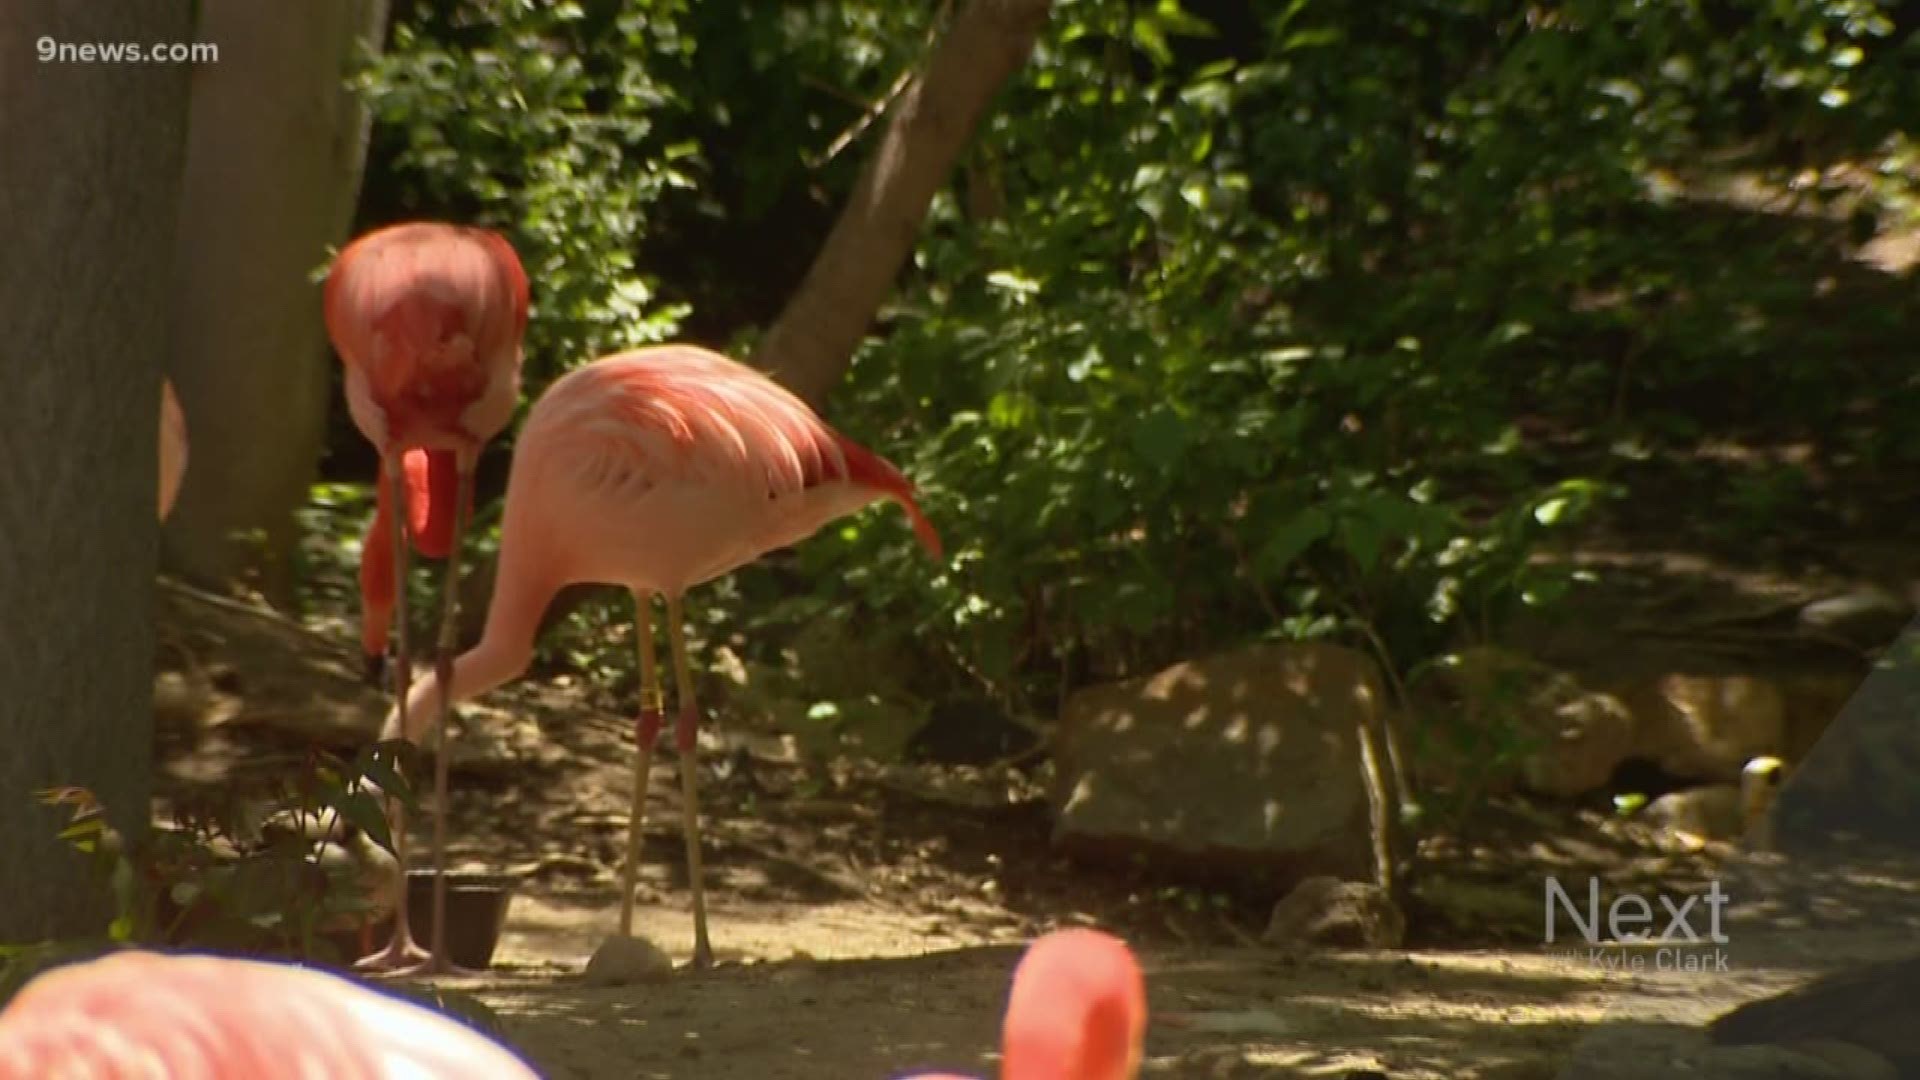 Birdkeepers say a Chilean Flamingo named Lance Bass, the lighter colored one, and American Flamingo Freddie Mercury, the pink one, always want to be together.